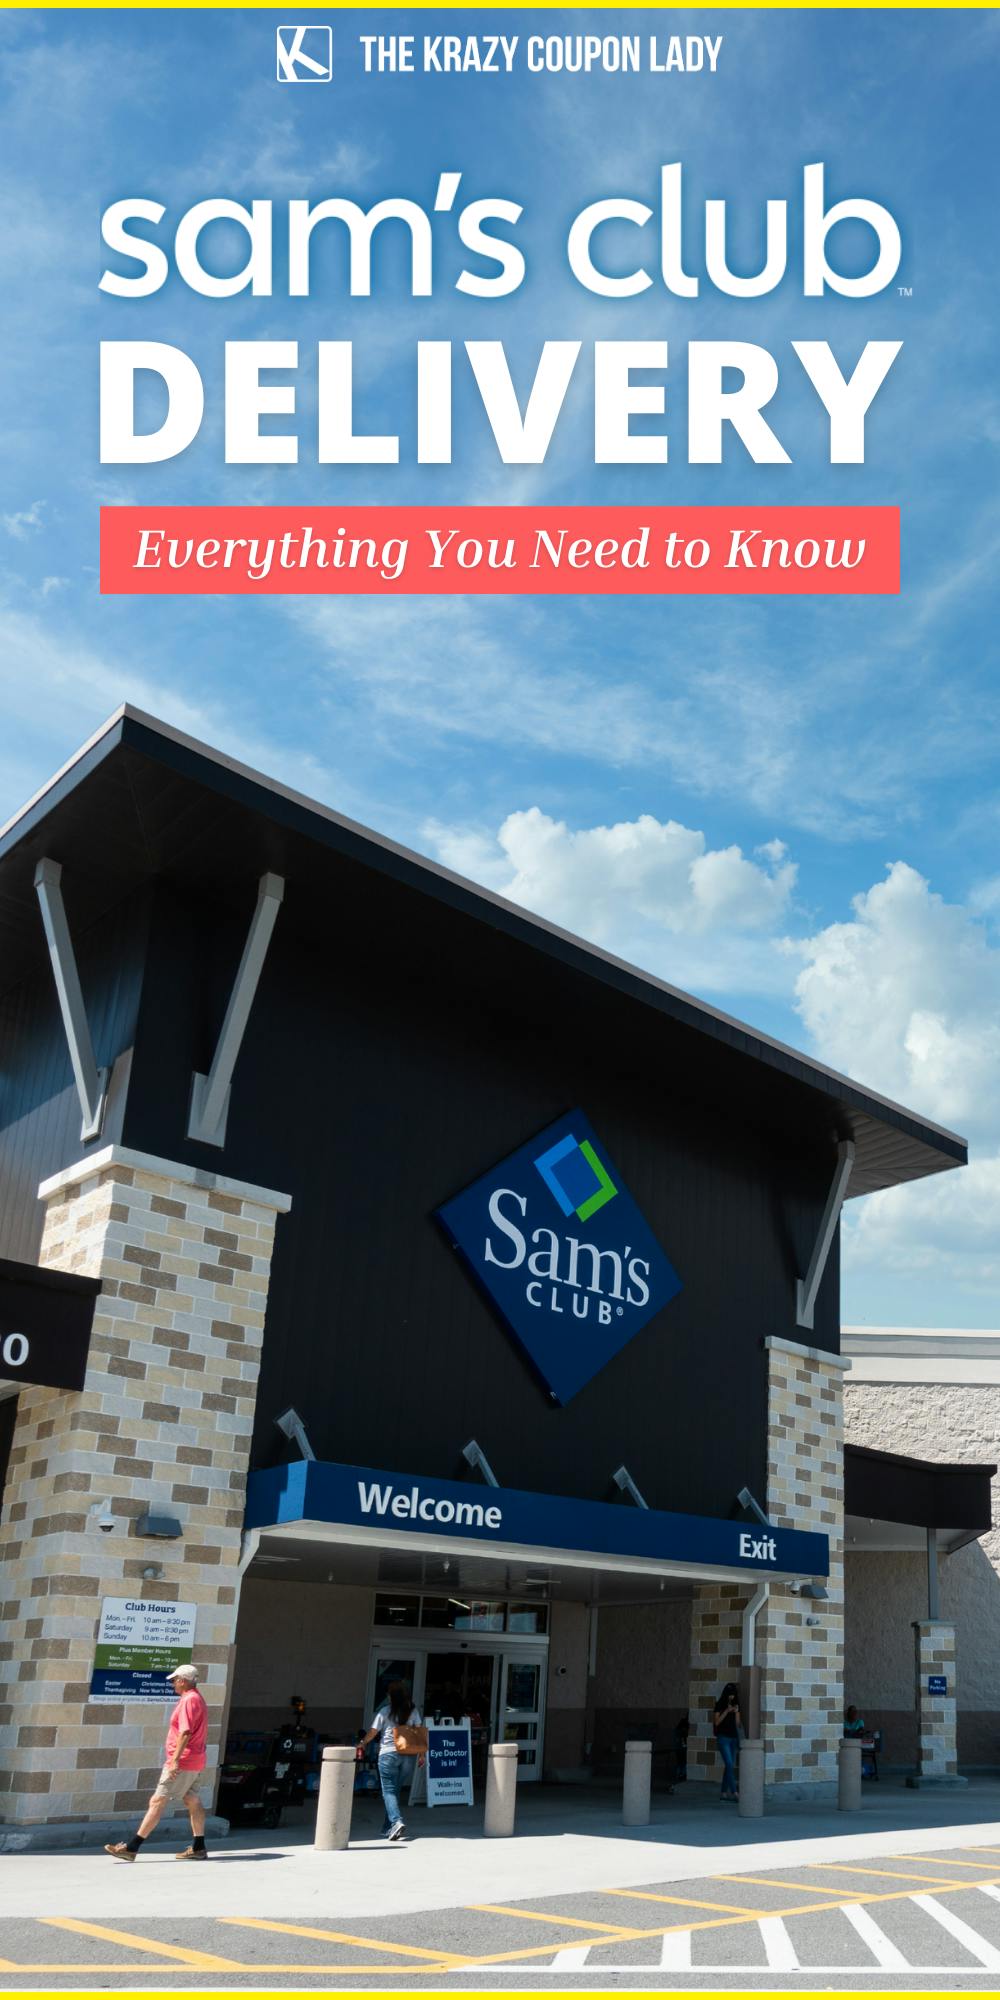 Sam's Club Delivery: Everything You Need to Know